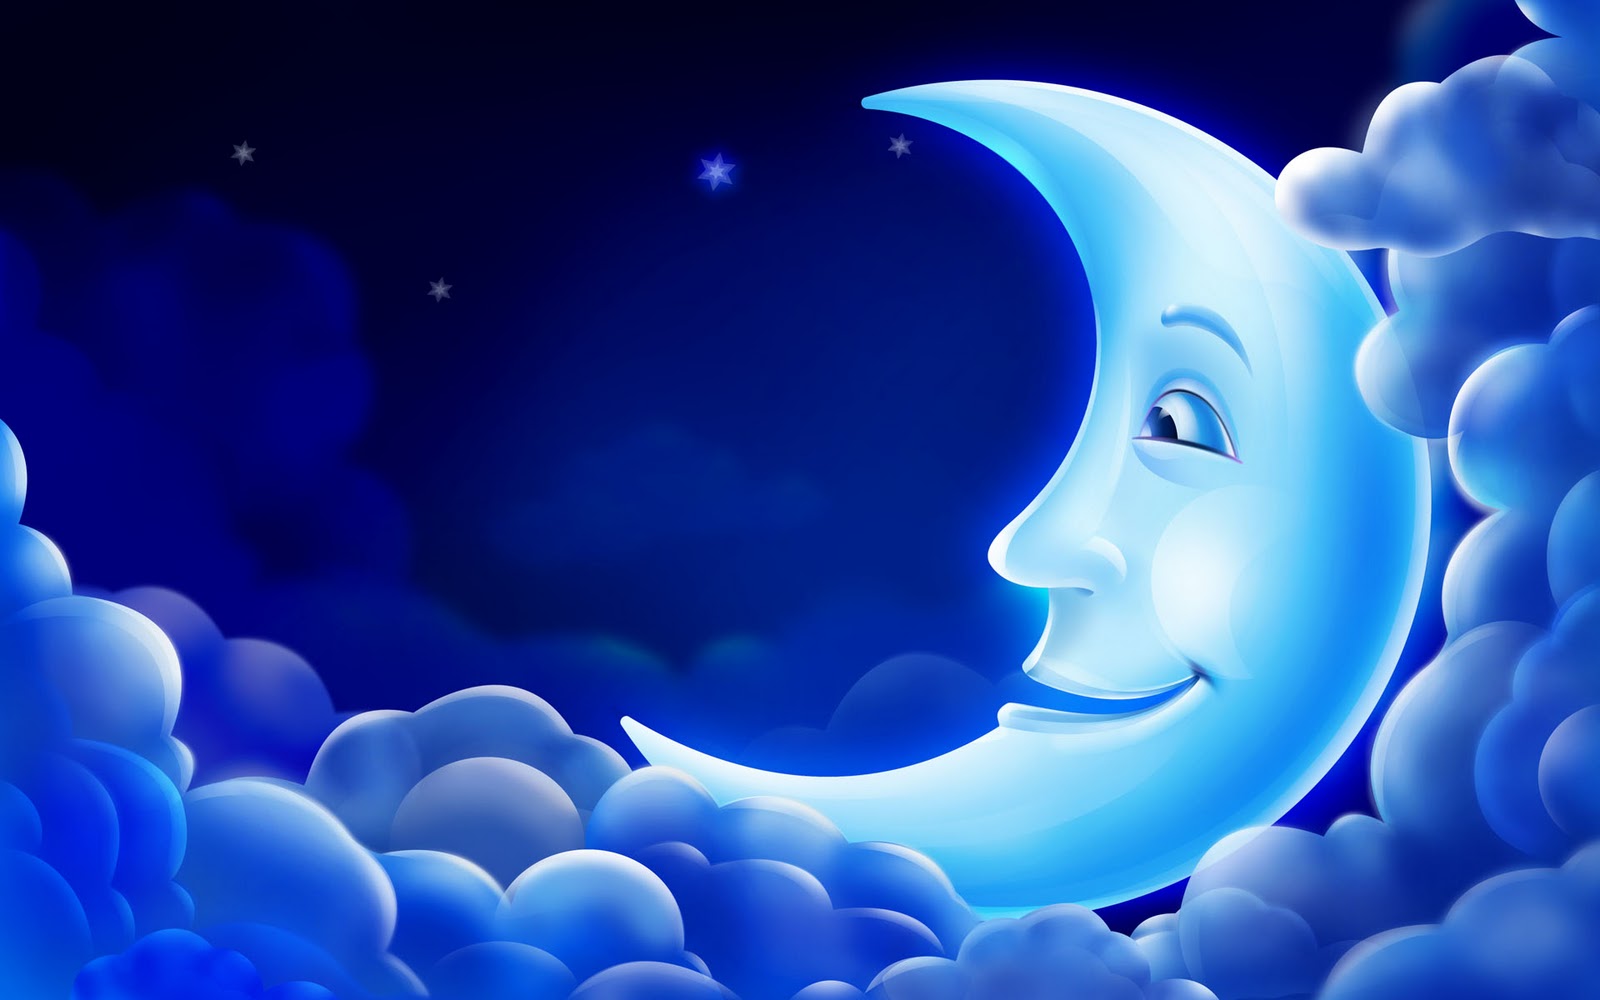 Moon Free Download 3D CG PC Wallpapers 3D Computer GraphicsHD HQ